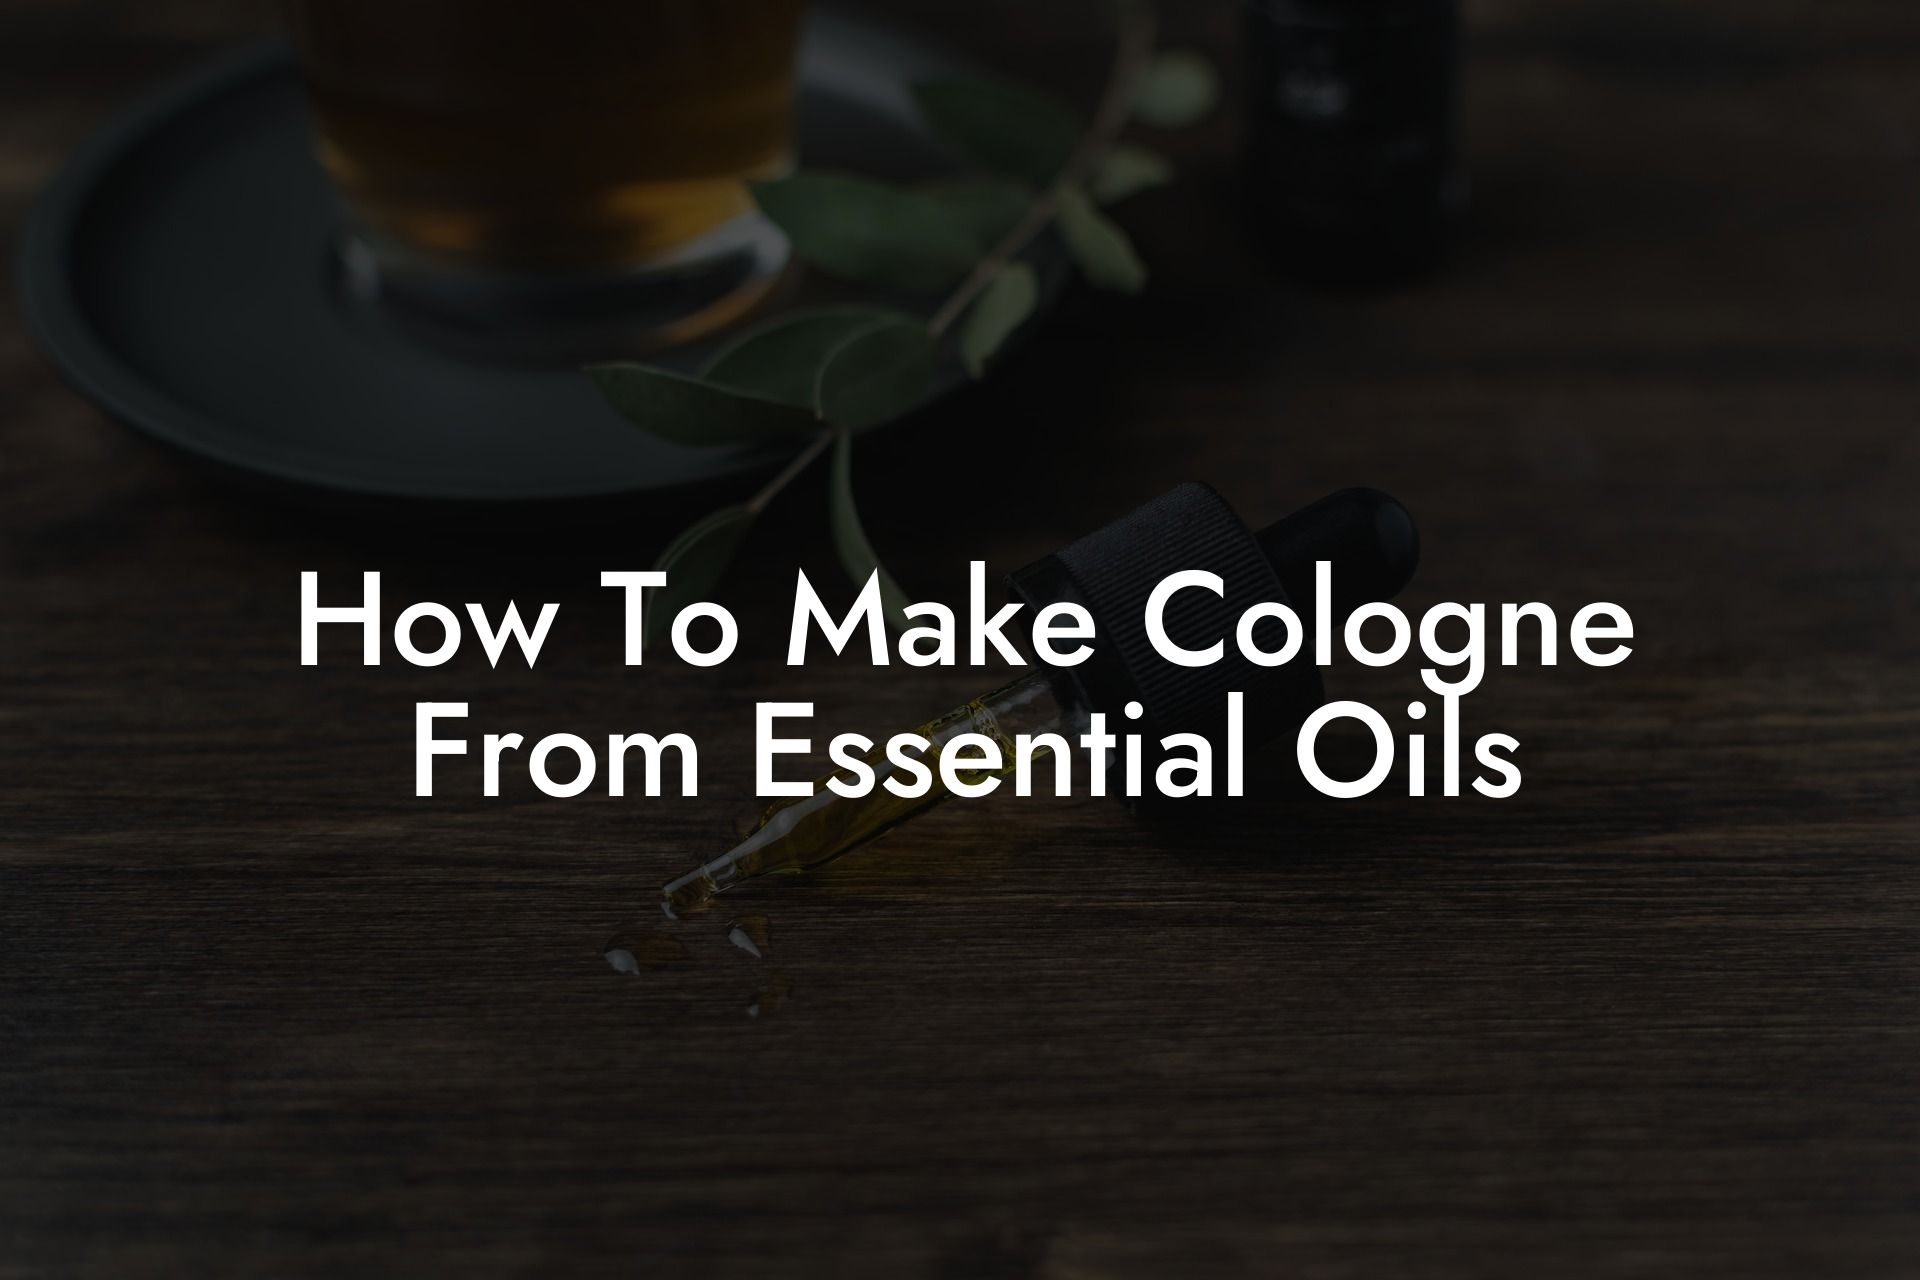 How To Make Cologne From Essential Oils